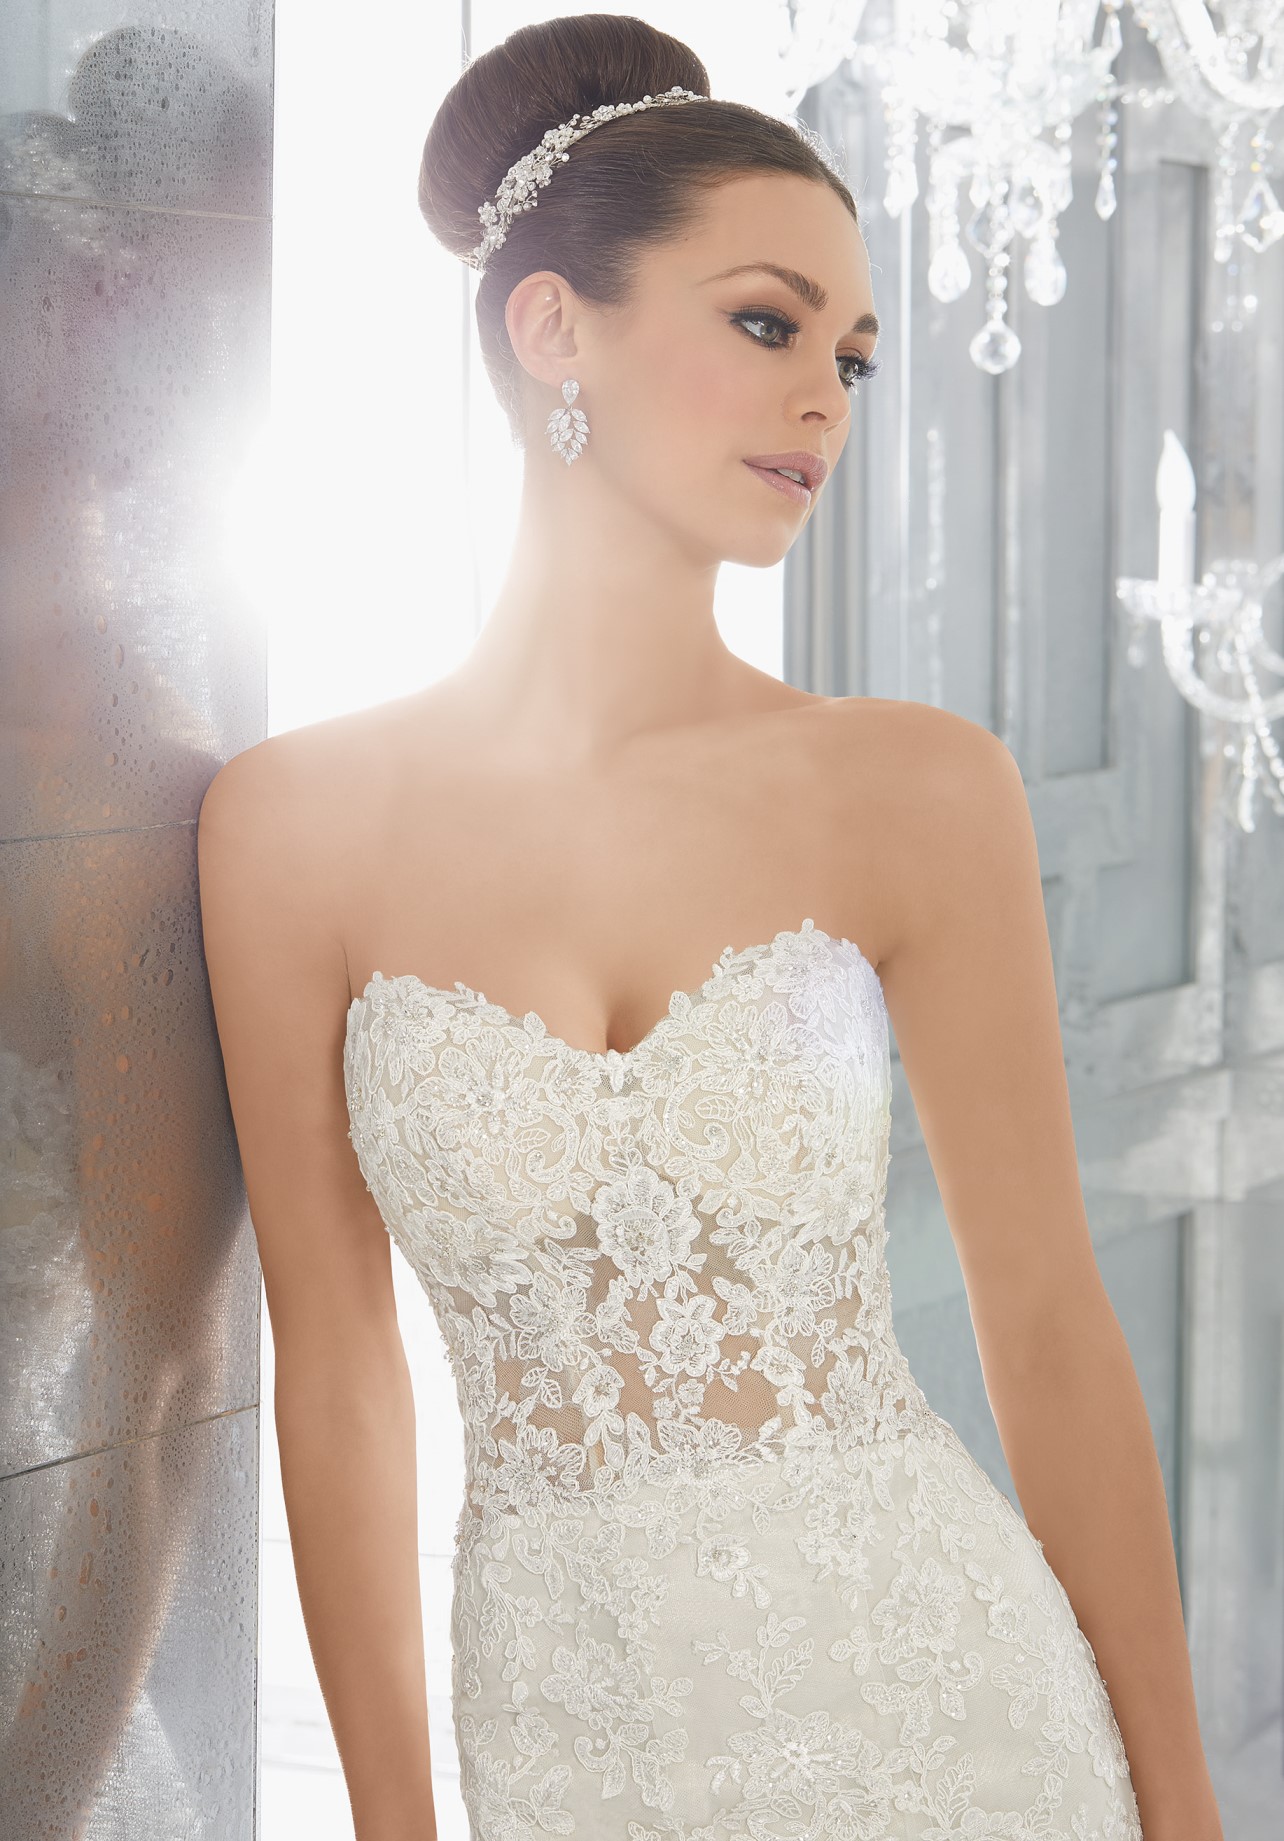 Stun with a see-through bodice and sweetheart neckline wedding dress